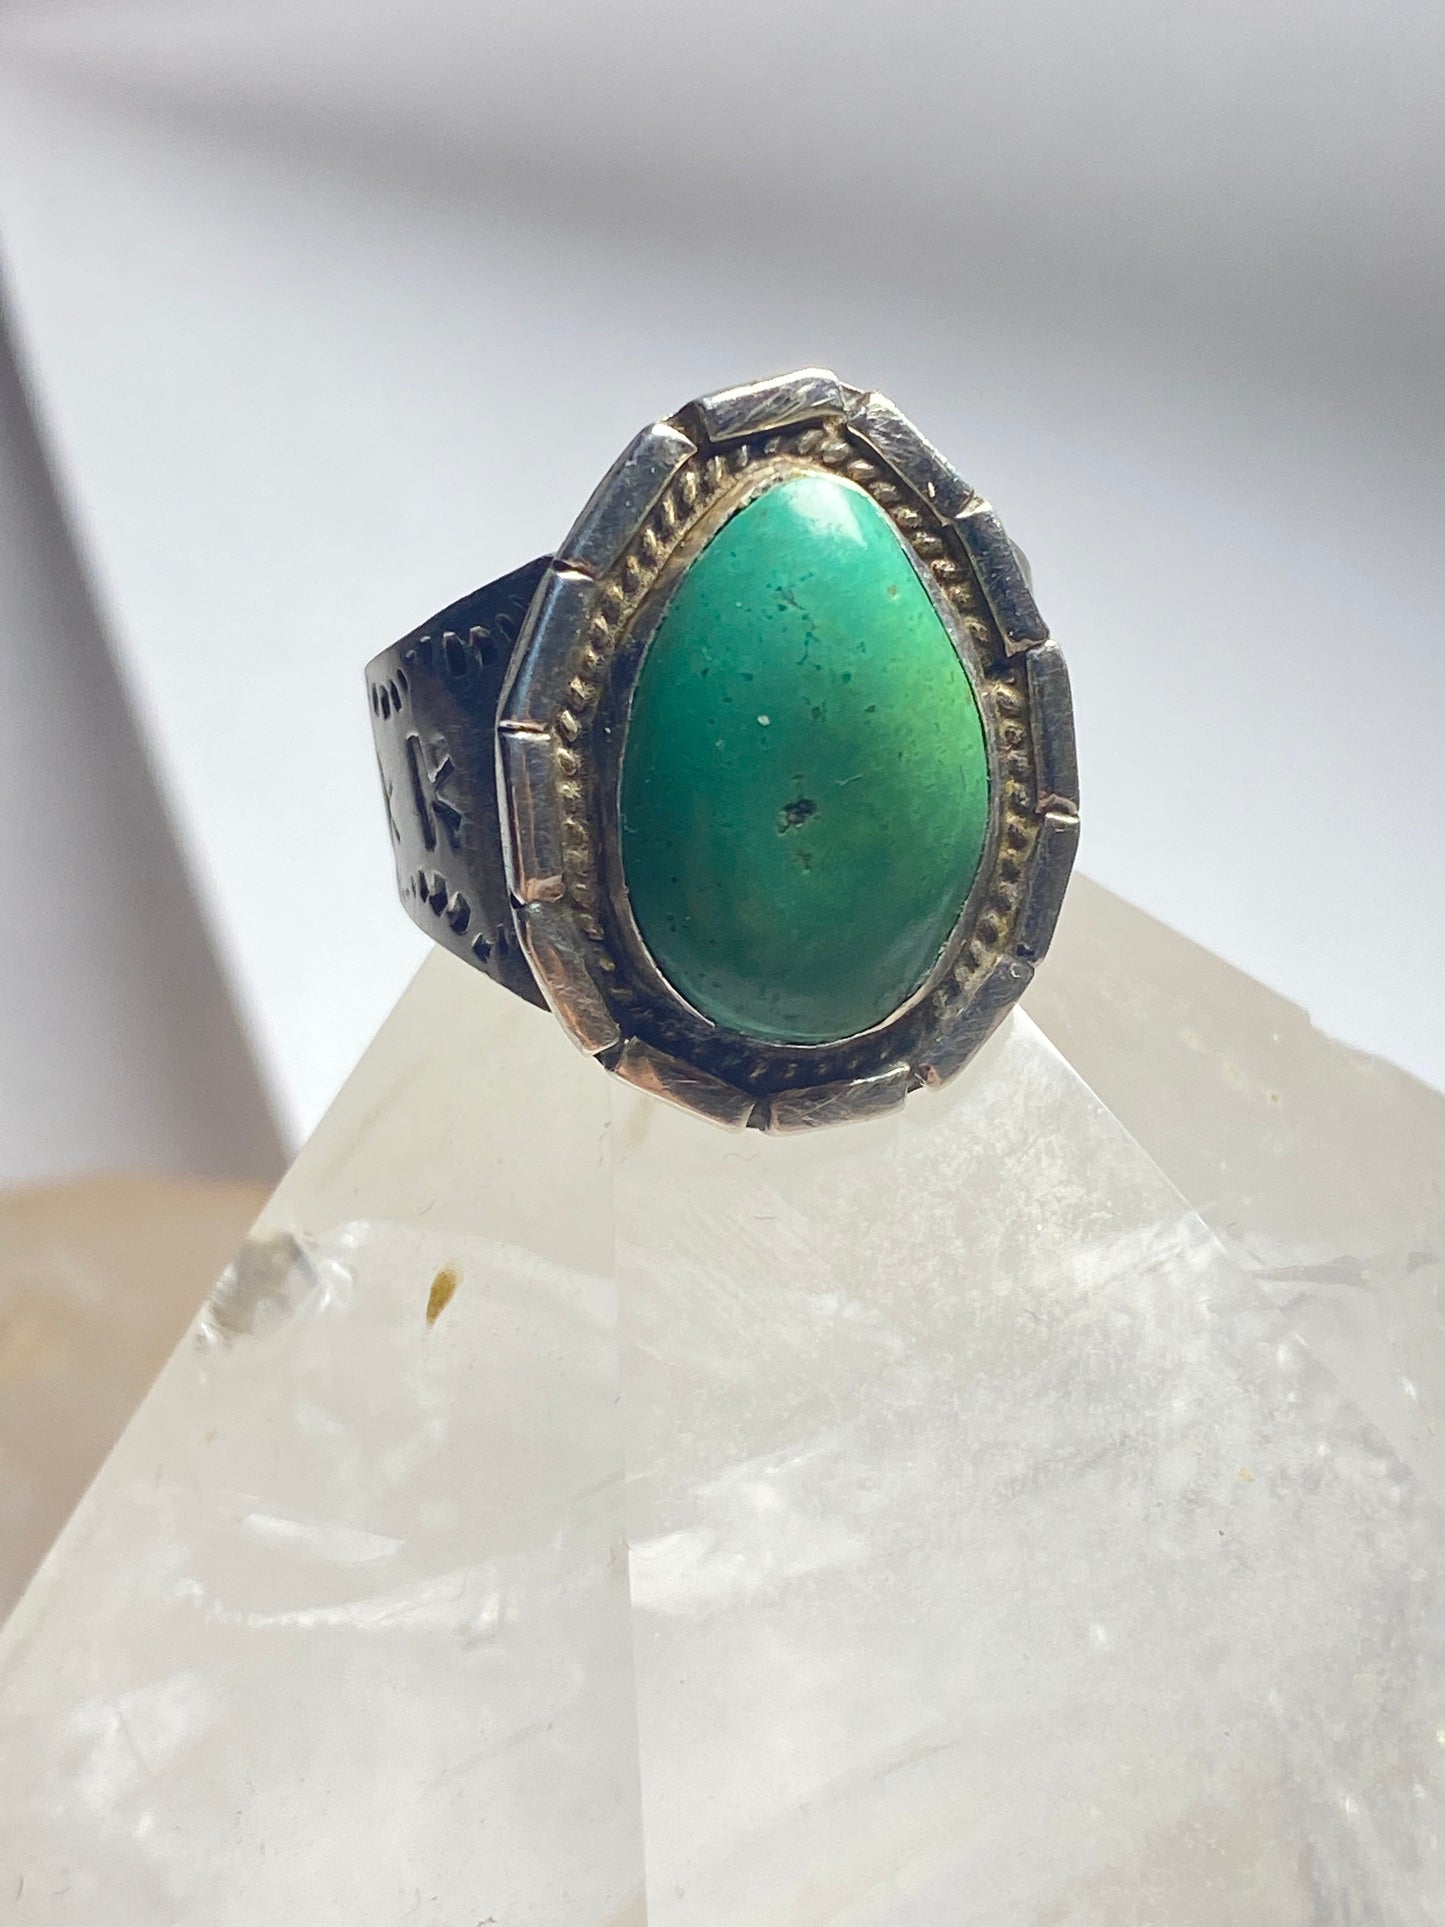 Turquoise ring size 11 long Navajo southwest Native American  sterling silver women men